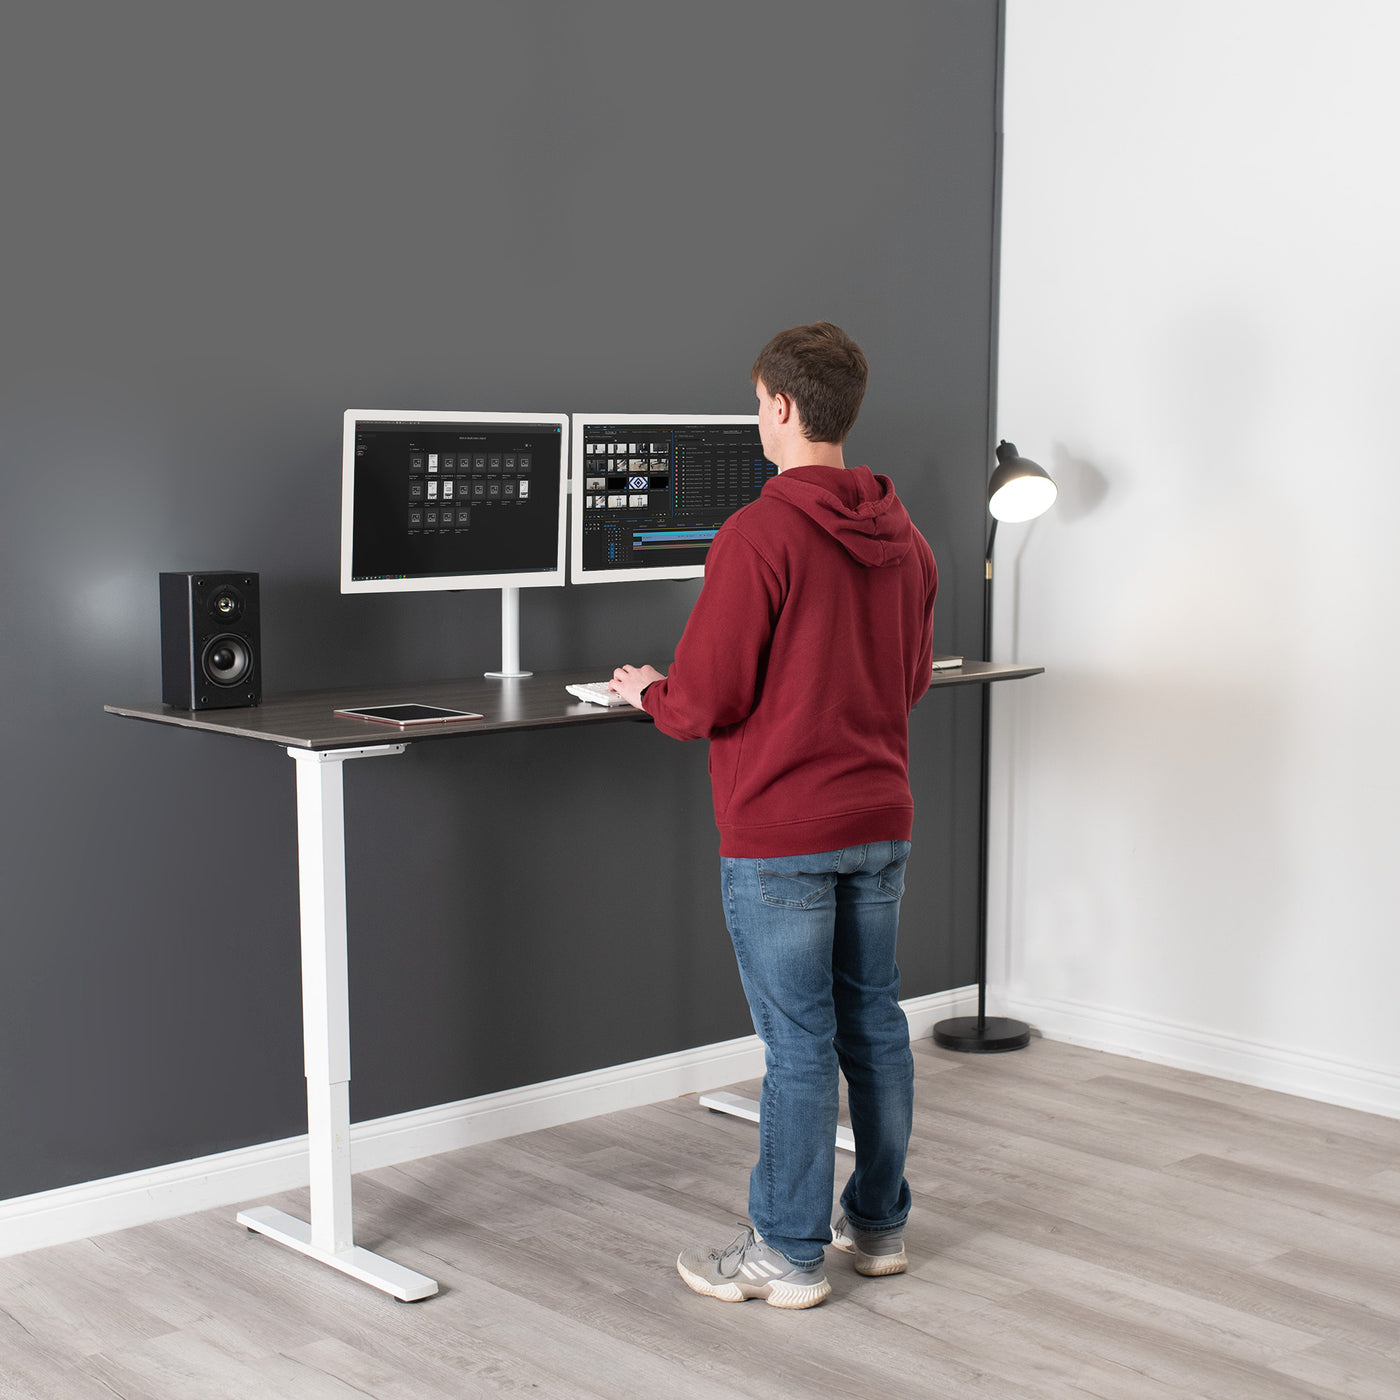 Sturdy ergonomic sit or stand desk frame for active workstation with adjustable height and smart control panel.